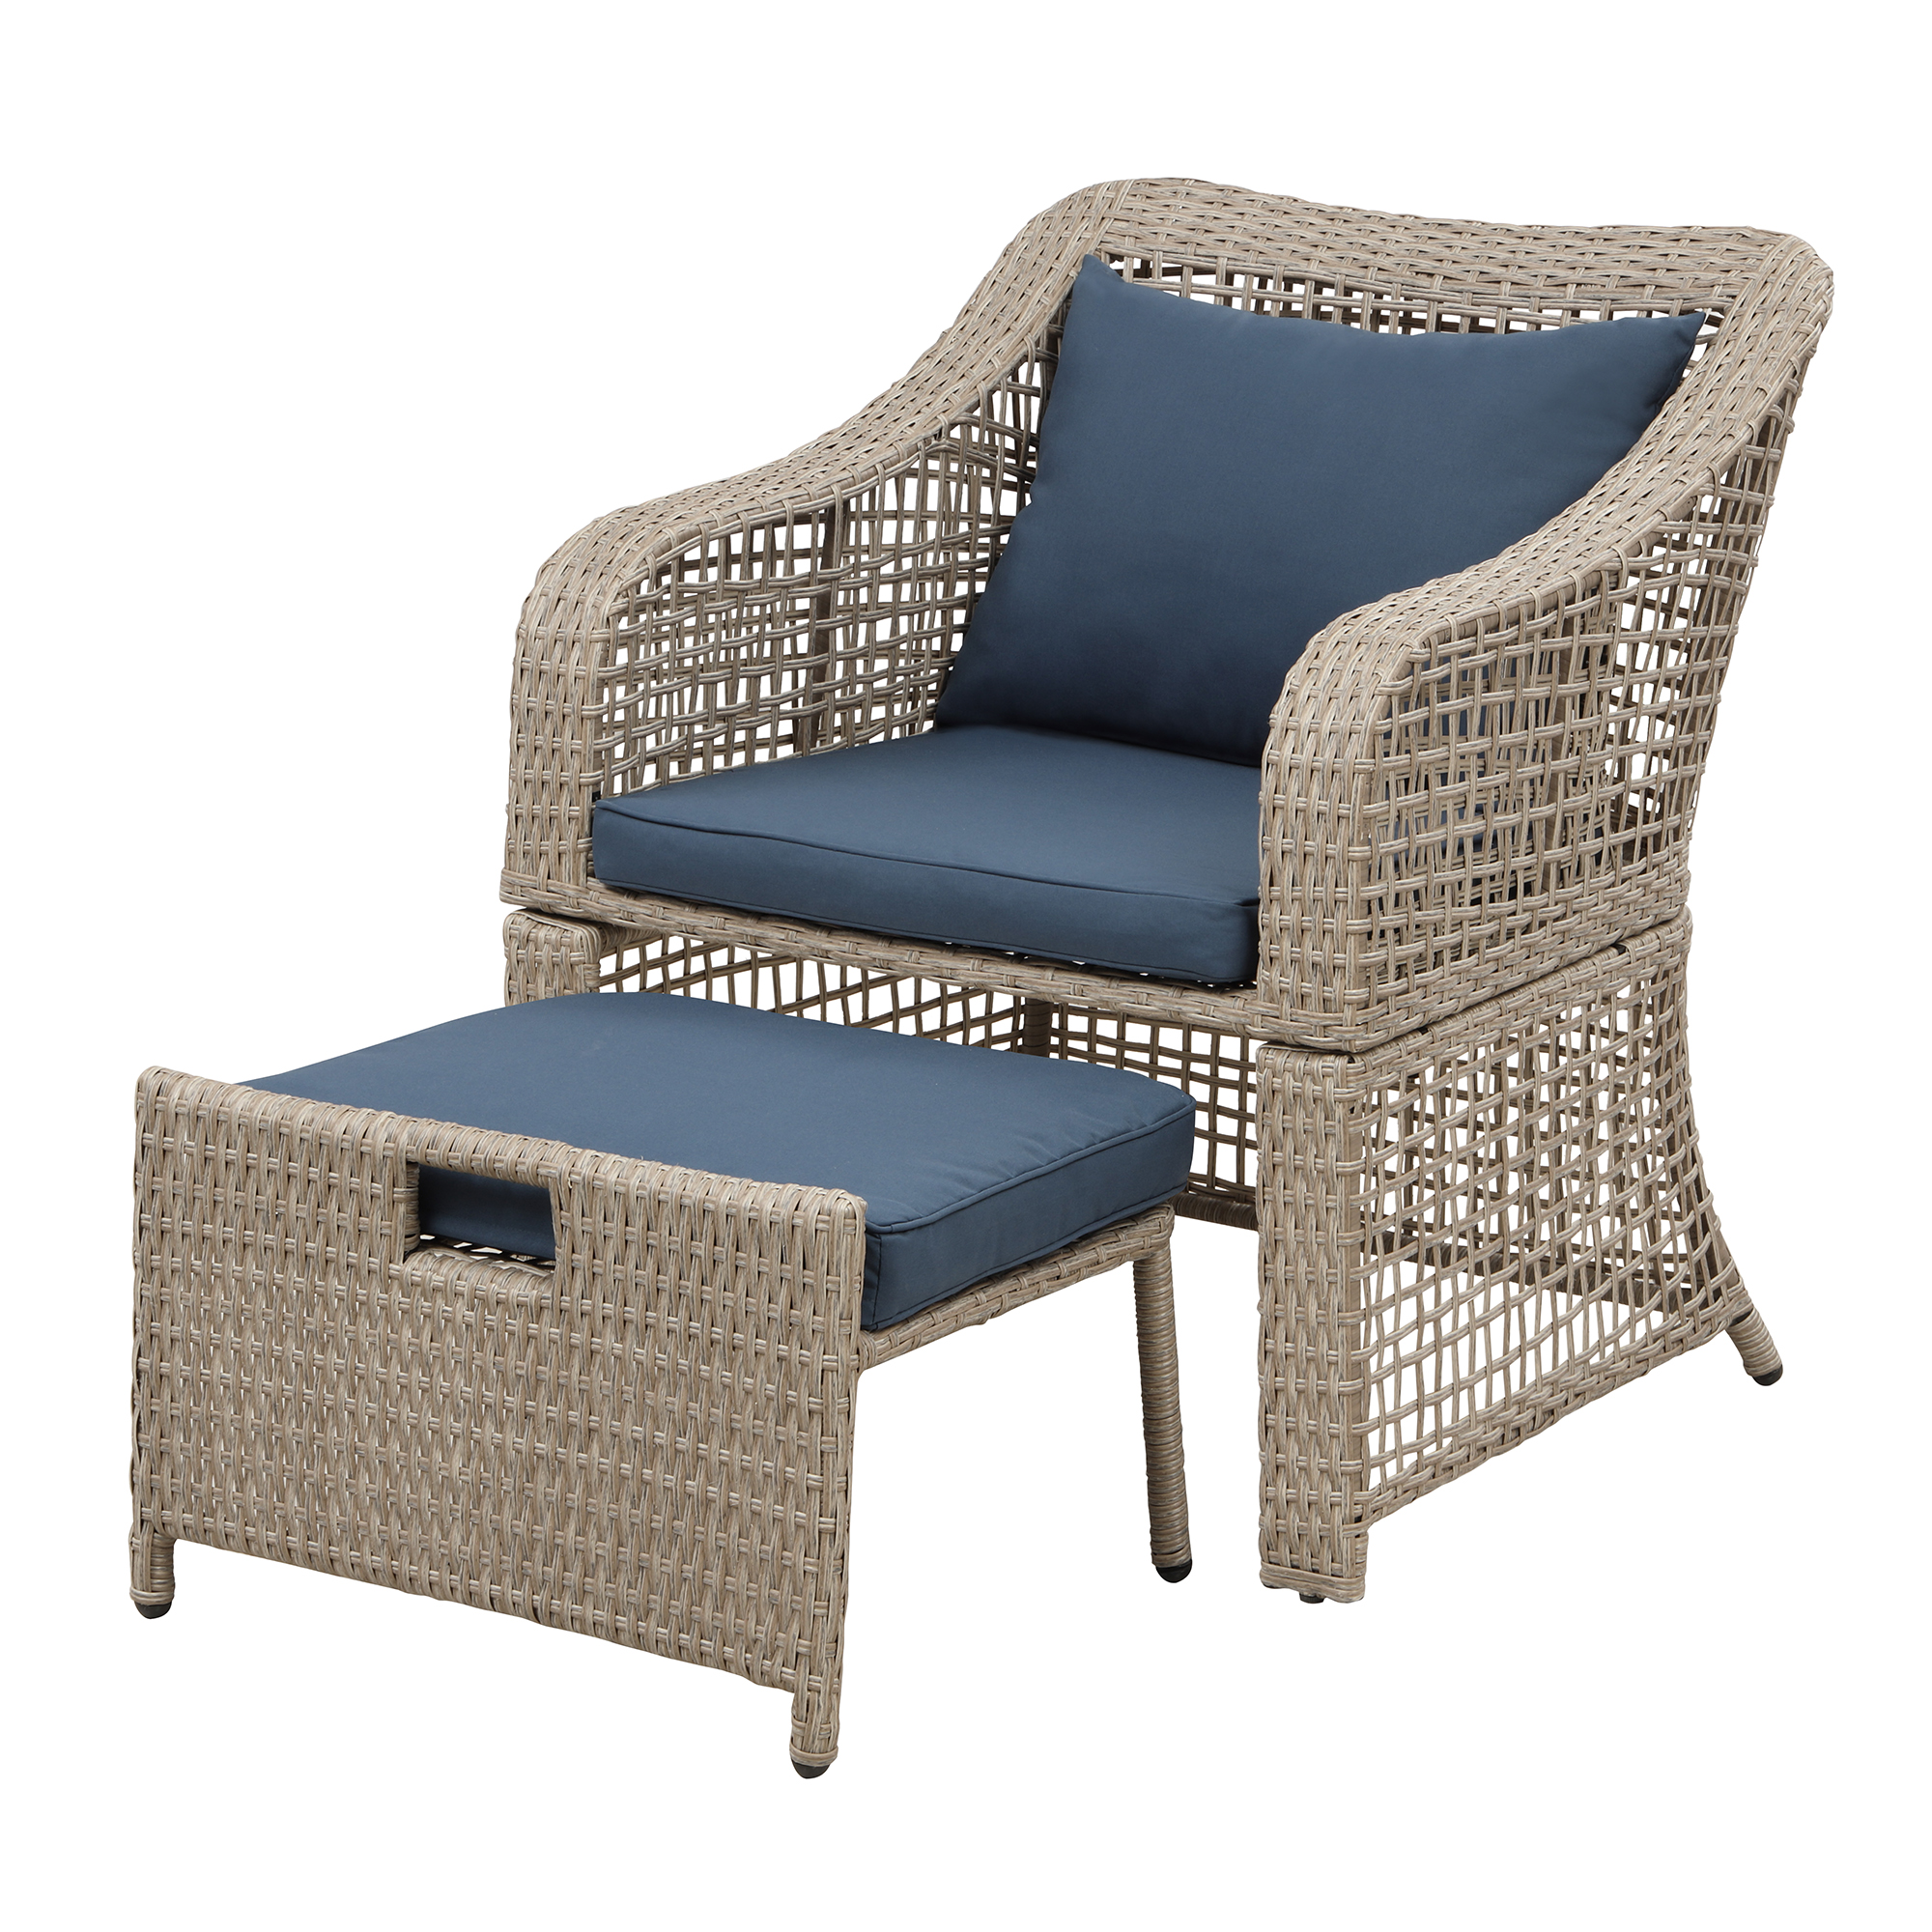 Patio Conversation Set, 5 Piece Outdoor Patio Furniture Sets with 2 Cushioned Chairs, 2 Ottoman, Glass Table, PE Wicker Rattan Outdoor Lounge Chair Chat Bistro Set for Backyard, Porch, Garden, LLL325 - image 5 of 9